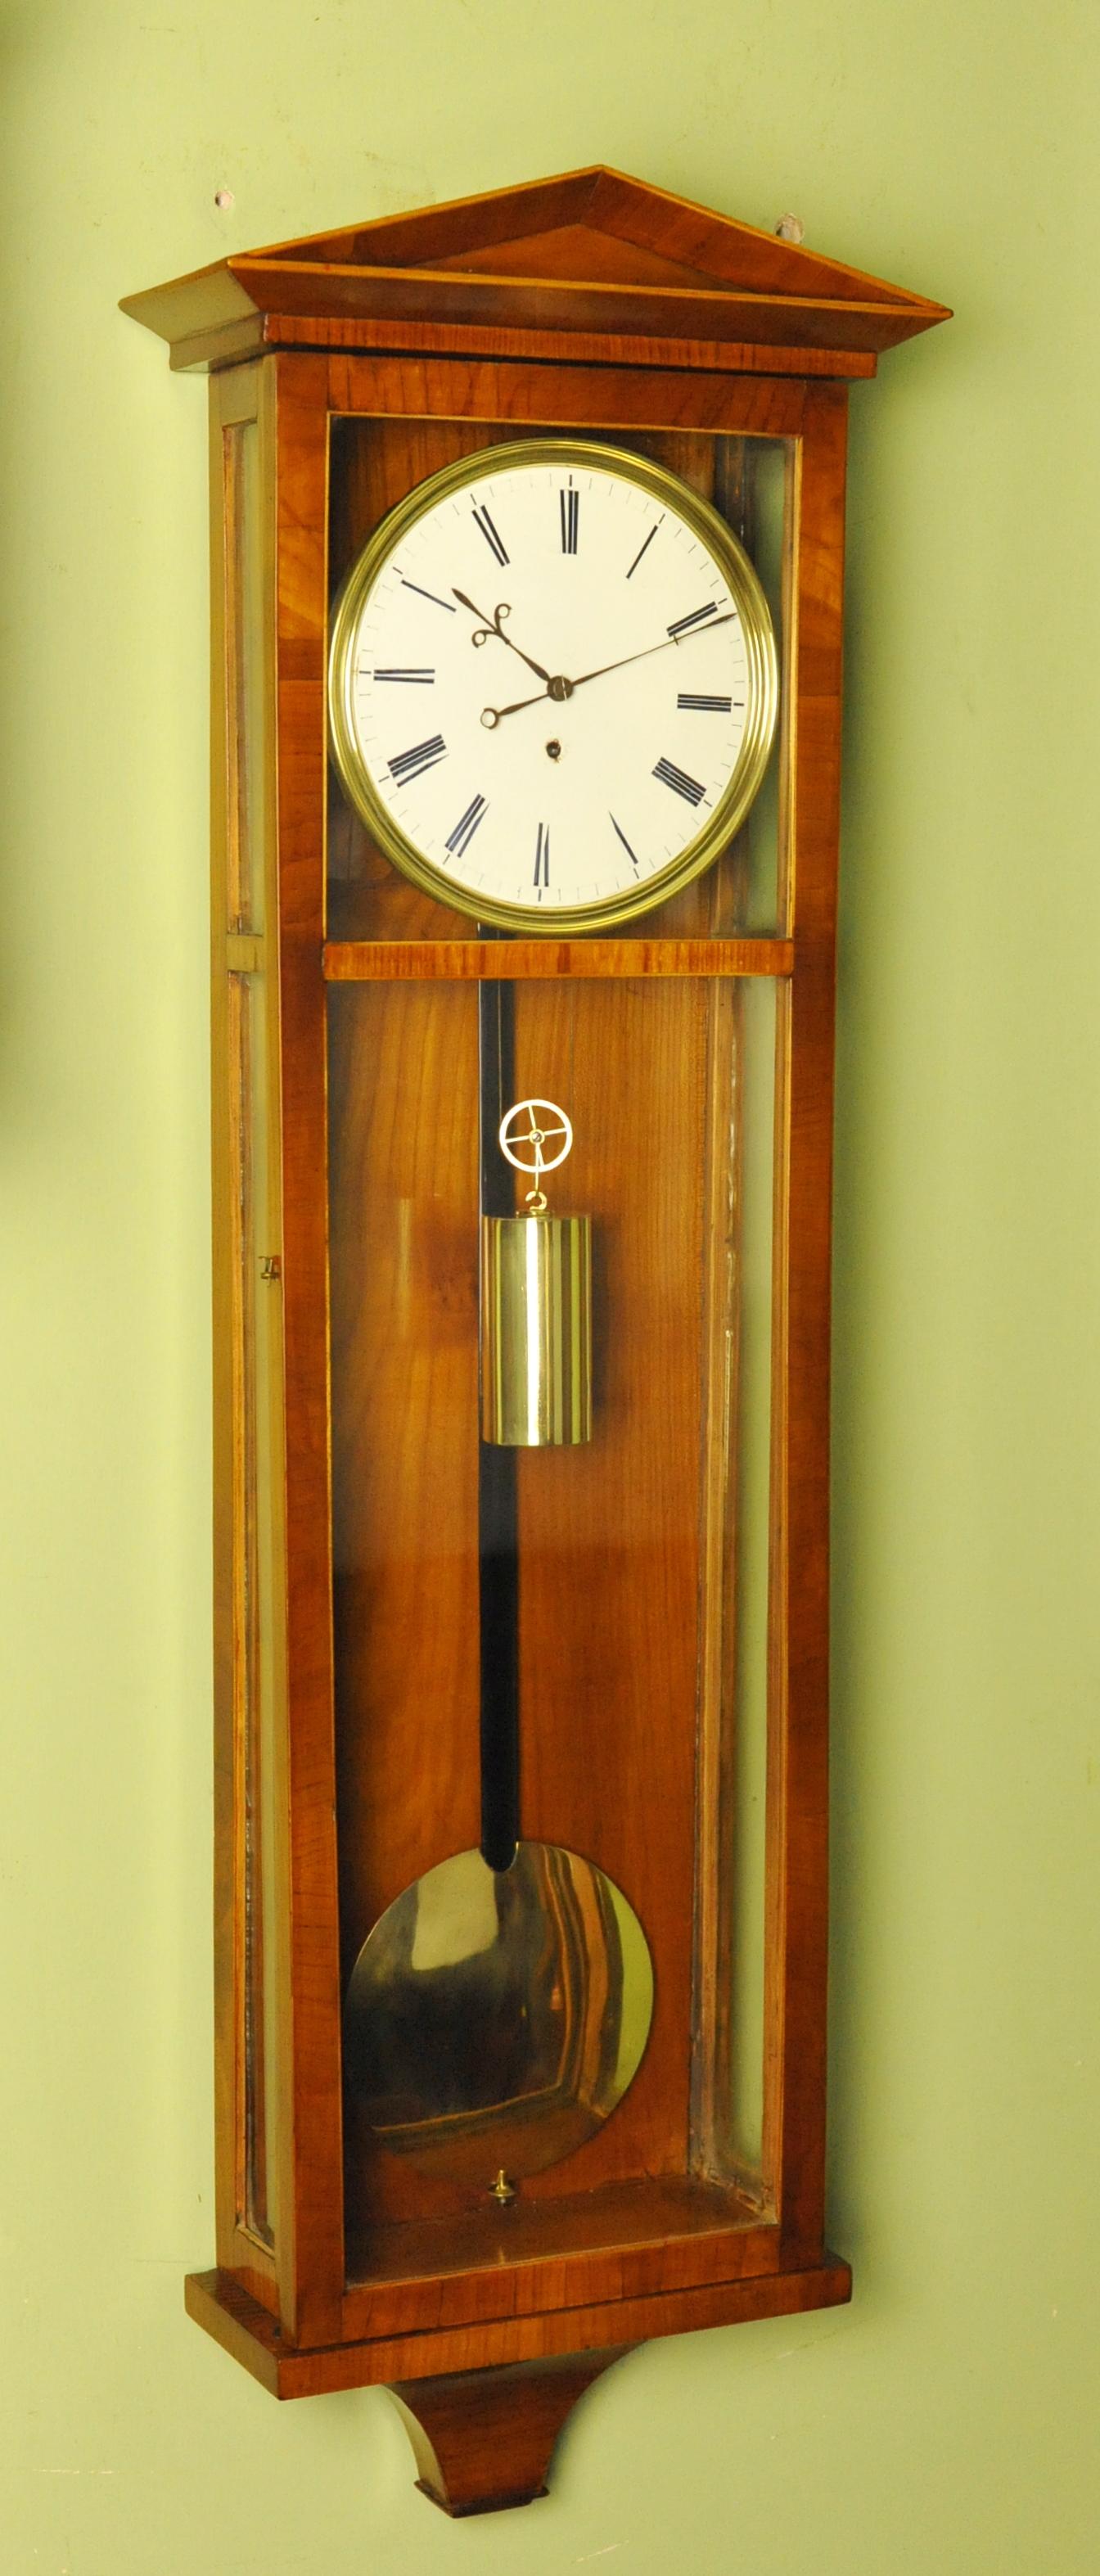 It is a pleasure to offer this very fine true Vienna regulator wall antique clock made circa 1840 with a beautiful and rare satinwood case
It is beautiful made and has very elegant and restrained proportions being of the Dachluhr (rooftop)